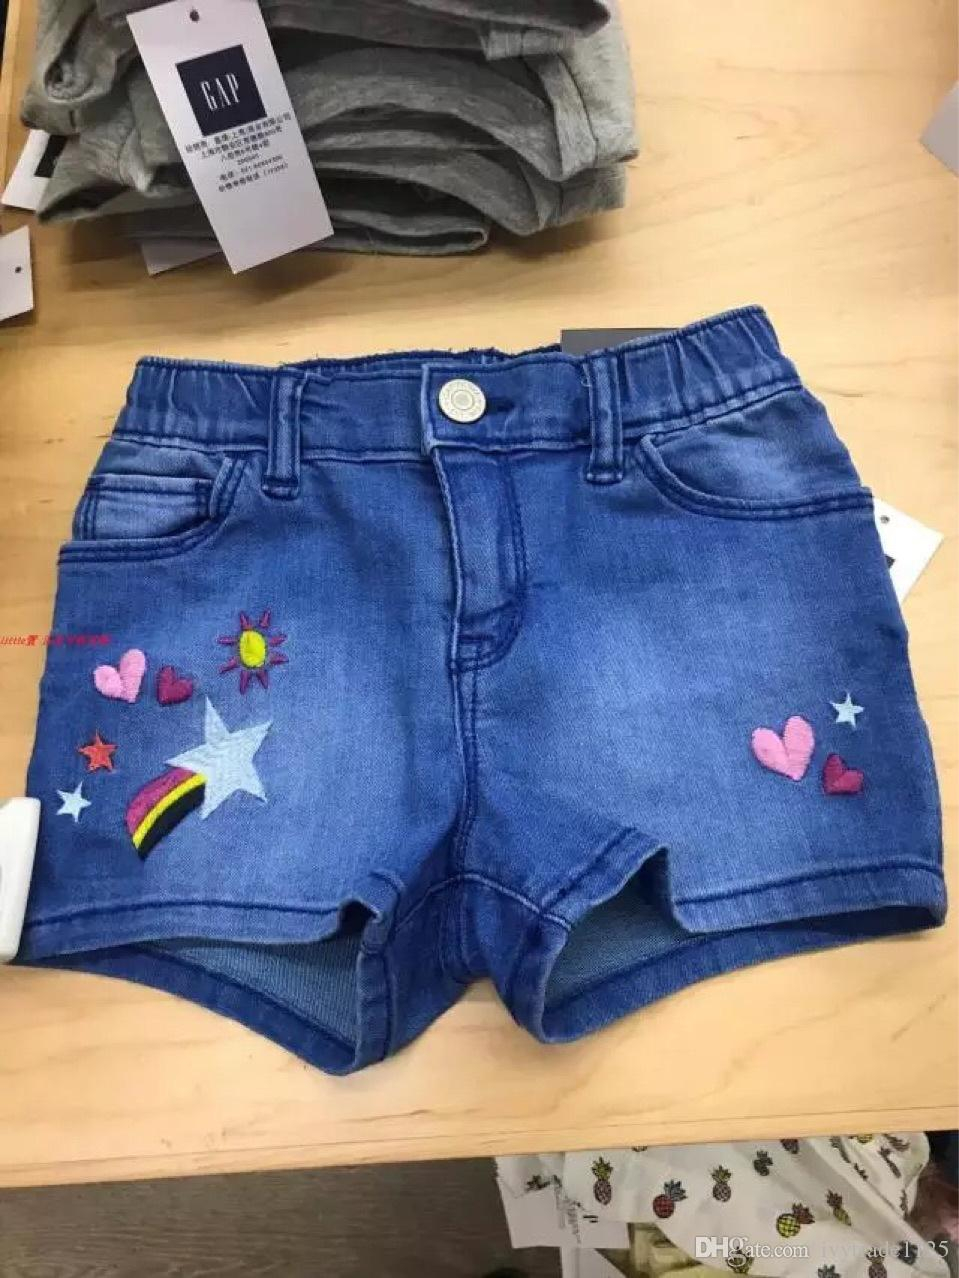 Embroidery Patterns For Kids New Summer 100cotton Flowers Rainbow Embroidery Design Girls Kids Short Pants Girls Causal Summer Denim Shorts Free Ship